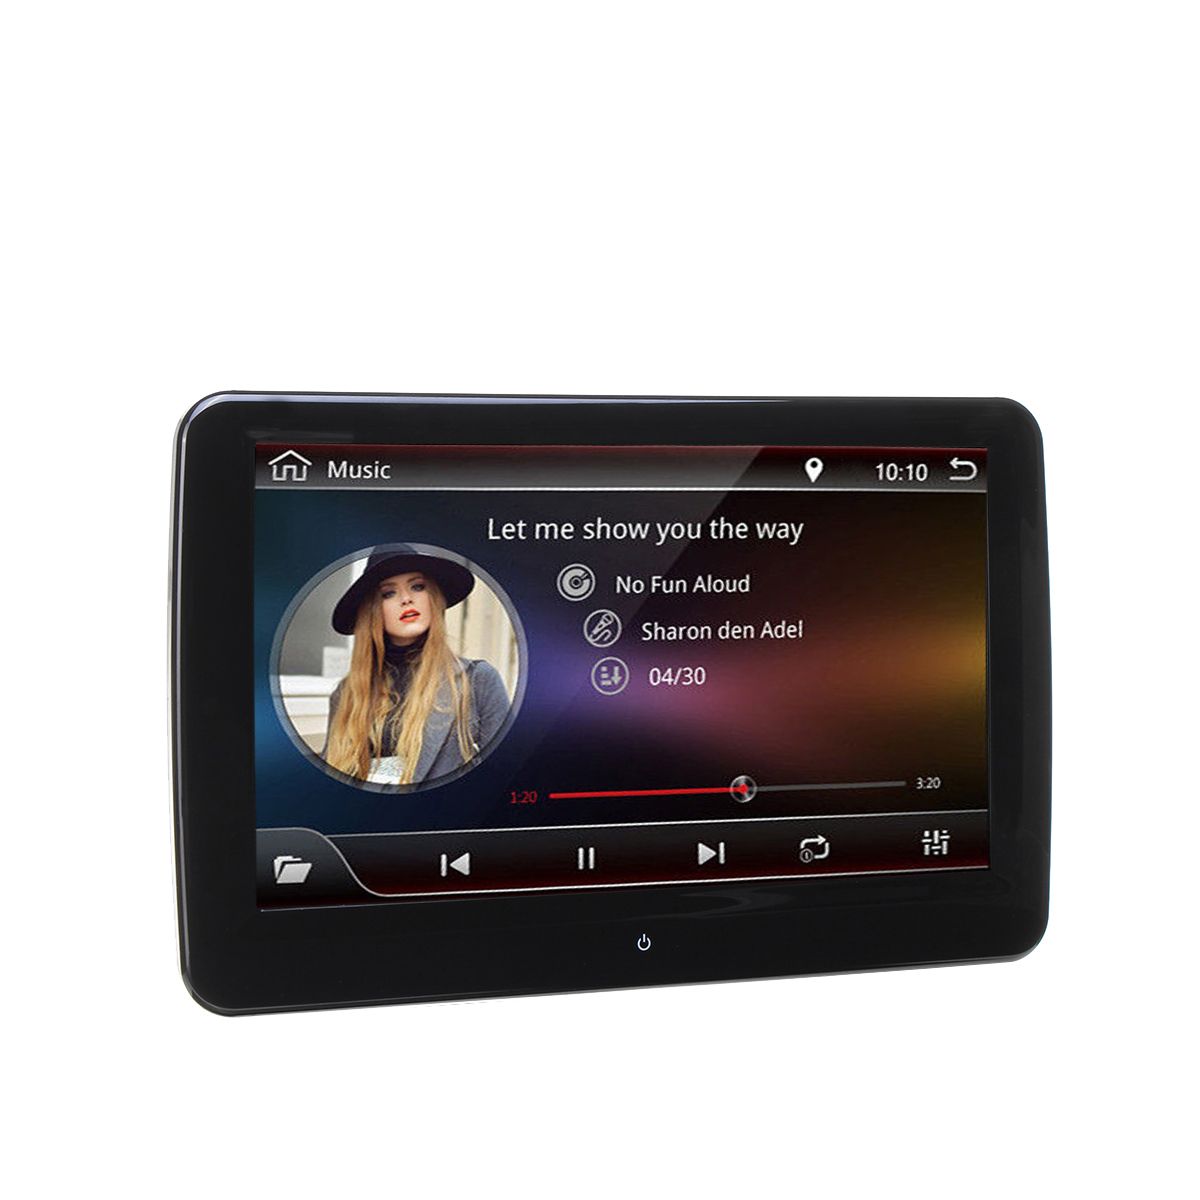 101-Inch-Android-70-4K-FHD-Touch-bluetooth-FM-WIFI-Car-Stereo-GPS-MP5-Player-1477067